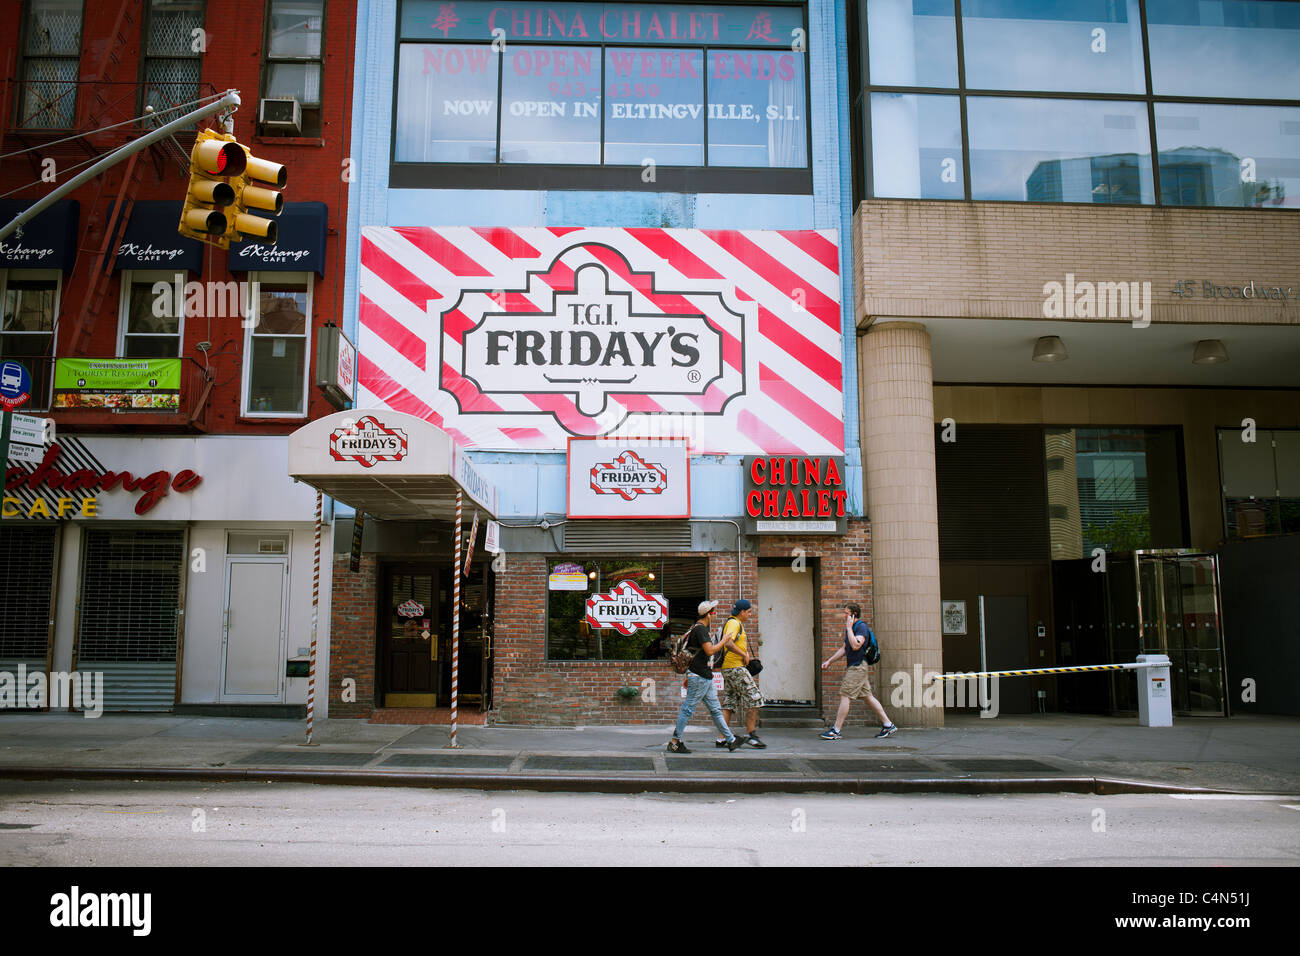 A Financial District branch of the T.G.I. Friday's restaurant chain in New York Stock Photo